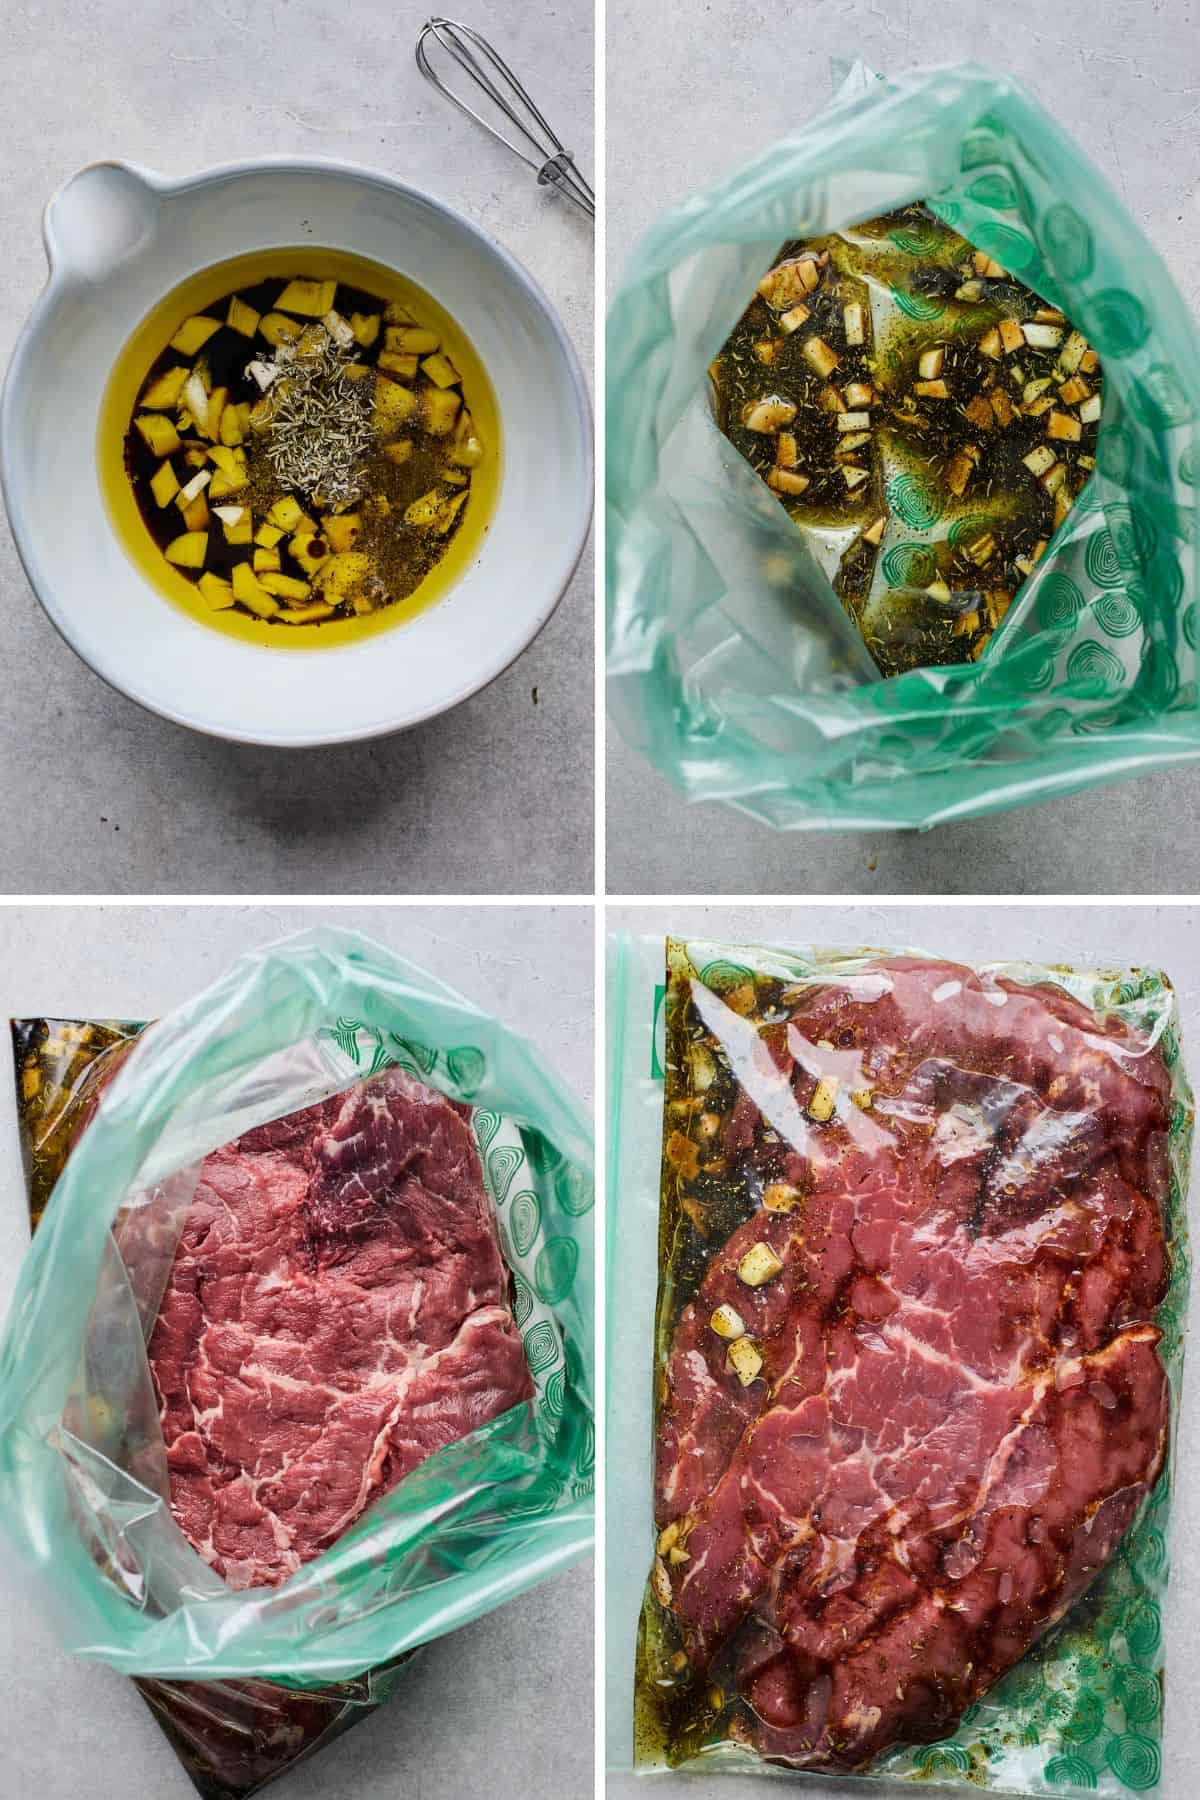 Collage of steps for making london broil including mixing the marinade ingredients and marinating the meat